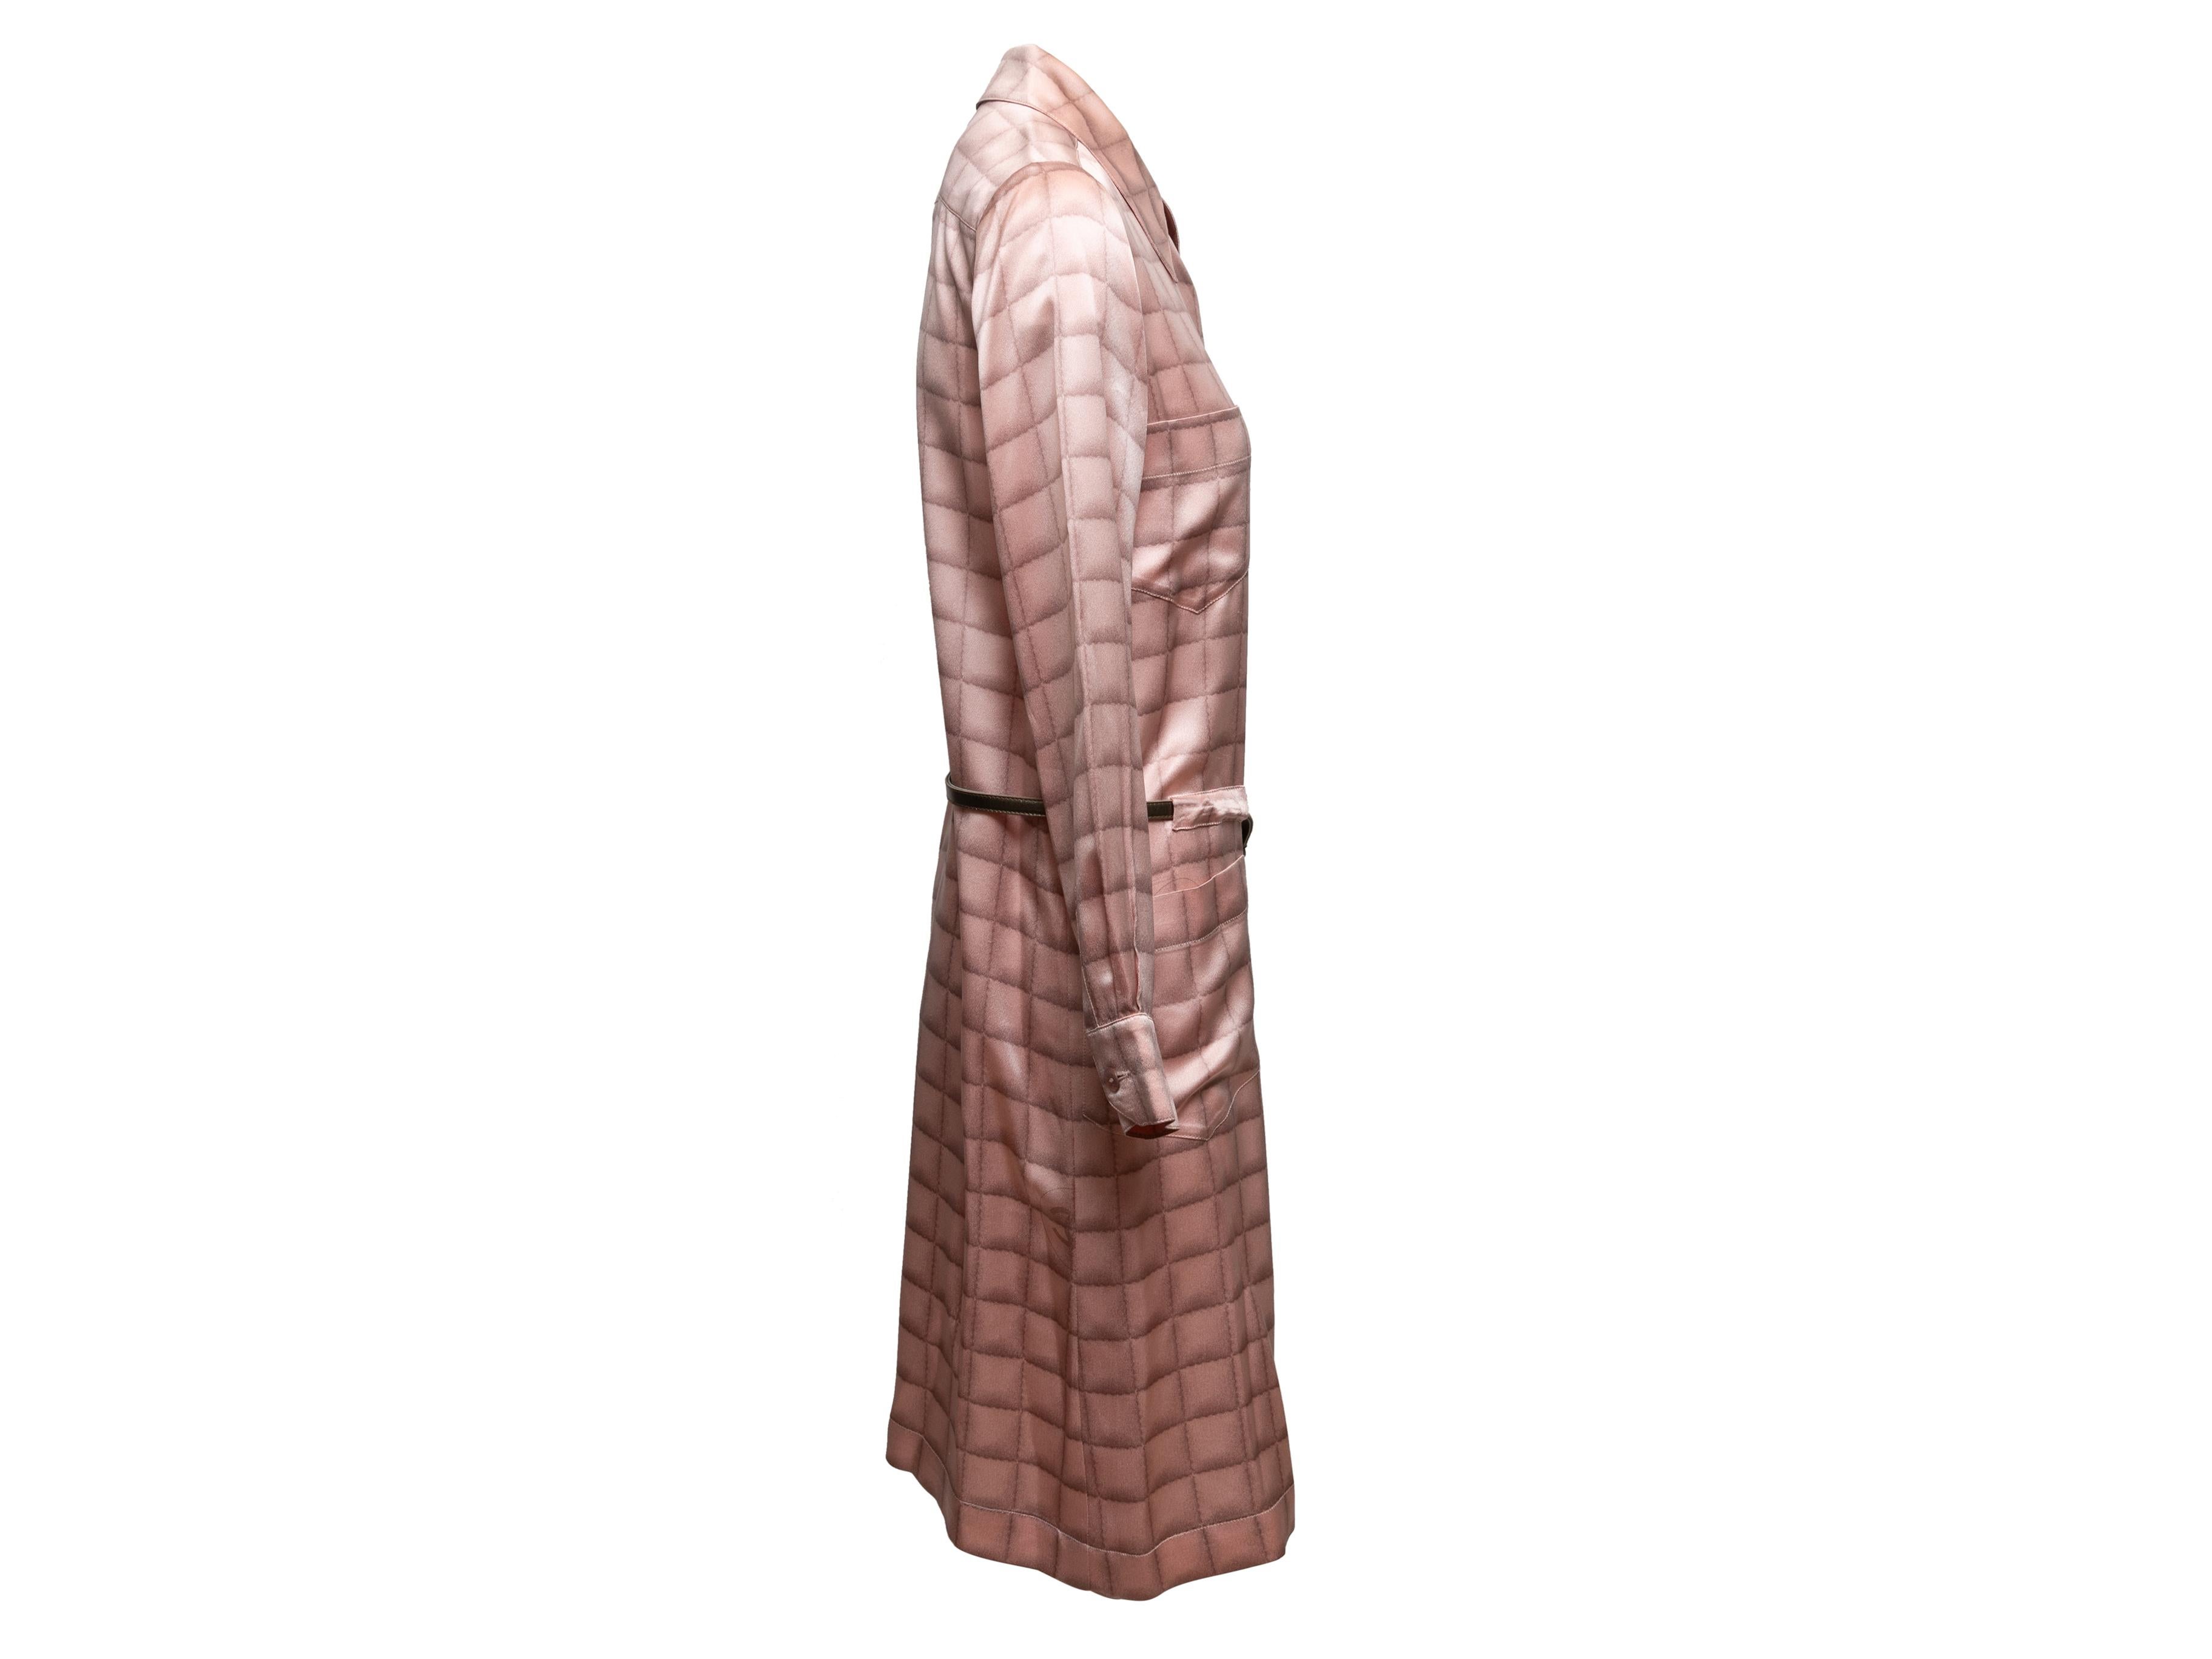 Vintage Light Pink Chanel Fall/Winter 2000 Printed Silk Dress Size FR 42 In Good Condition For Sale In New York, NY